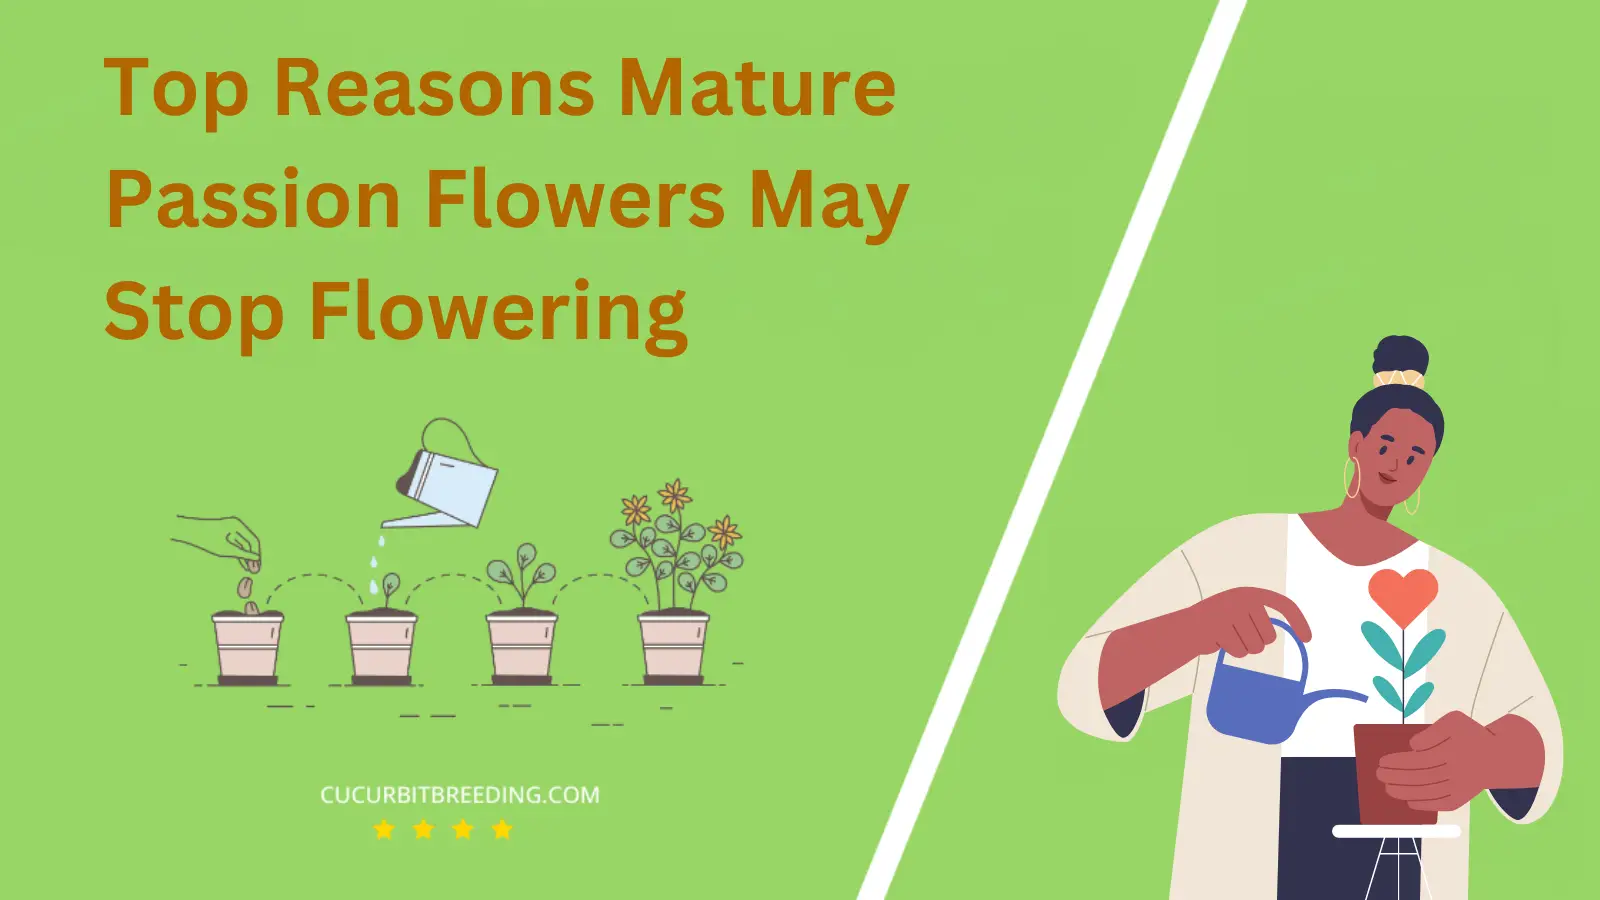 Top Reasons Mature Passion Flowers May Stop Flowering